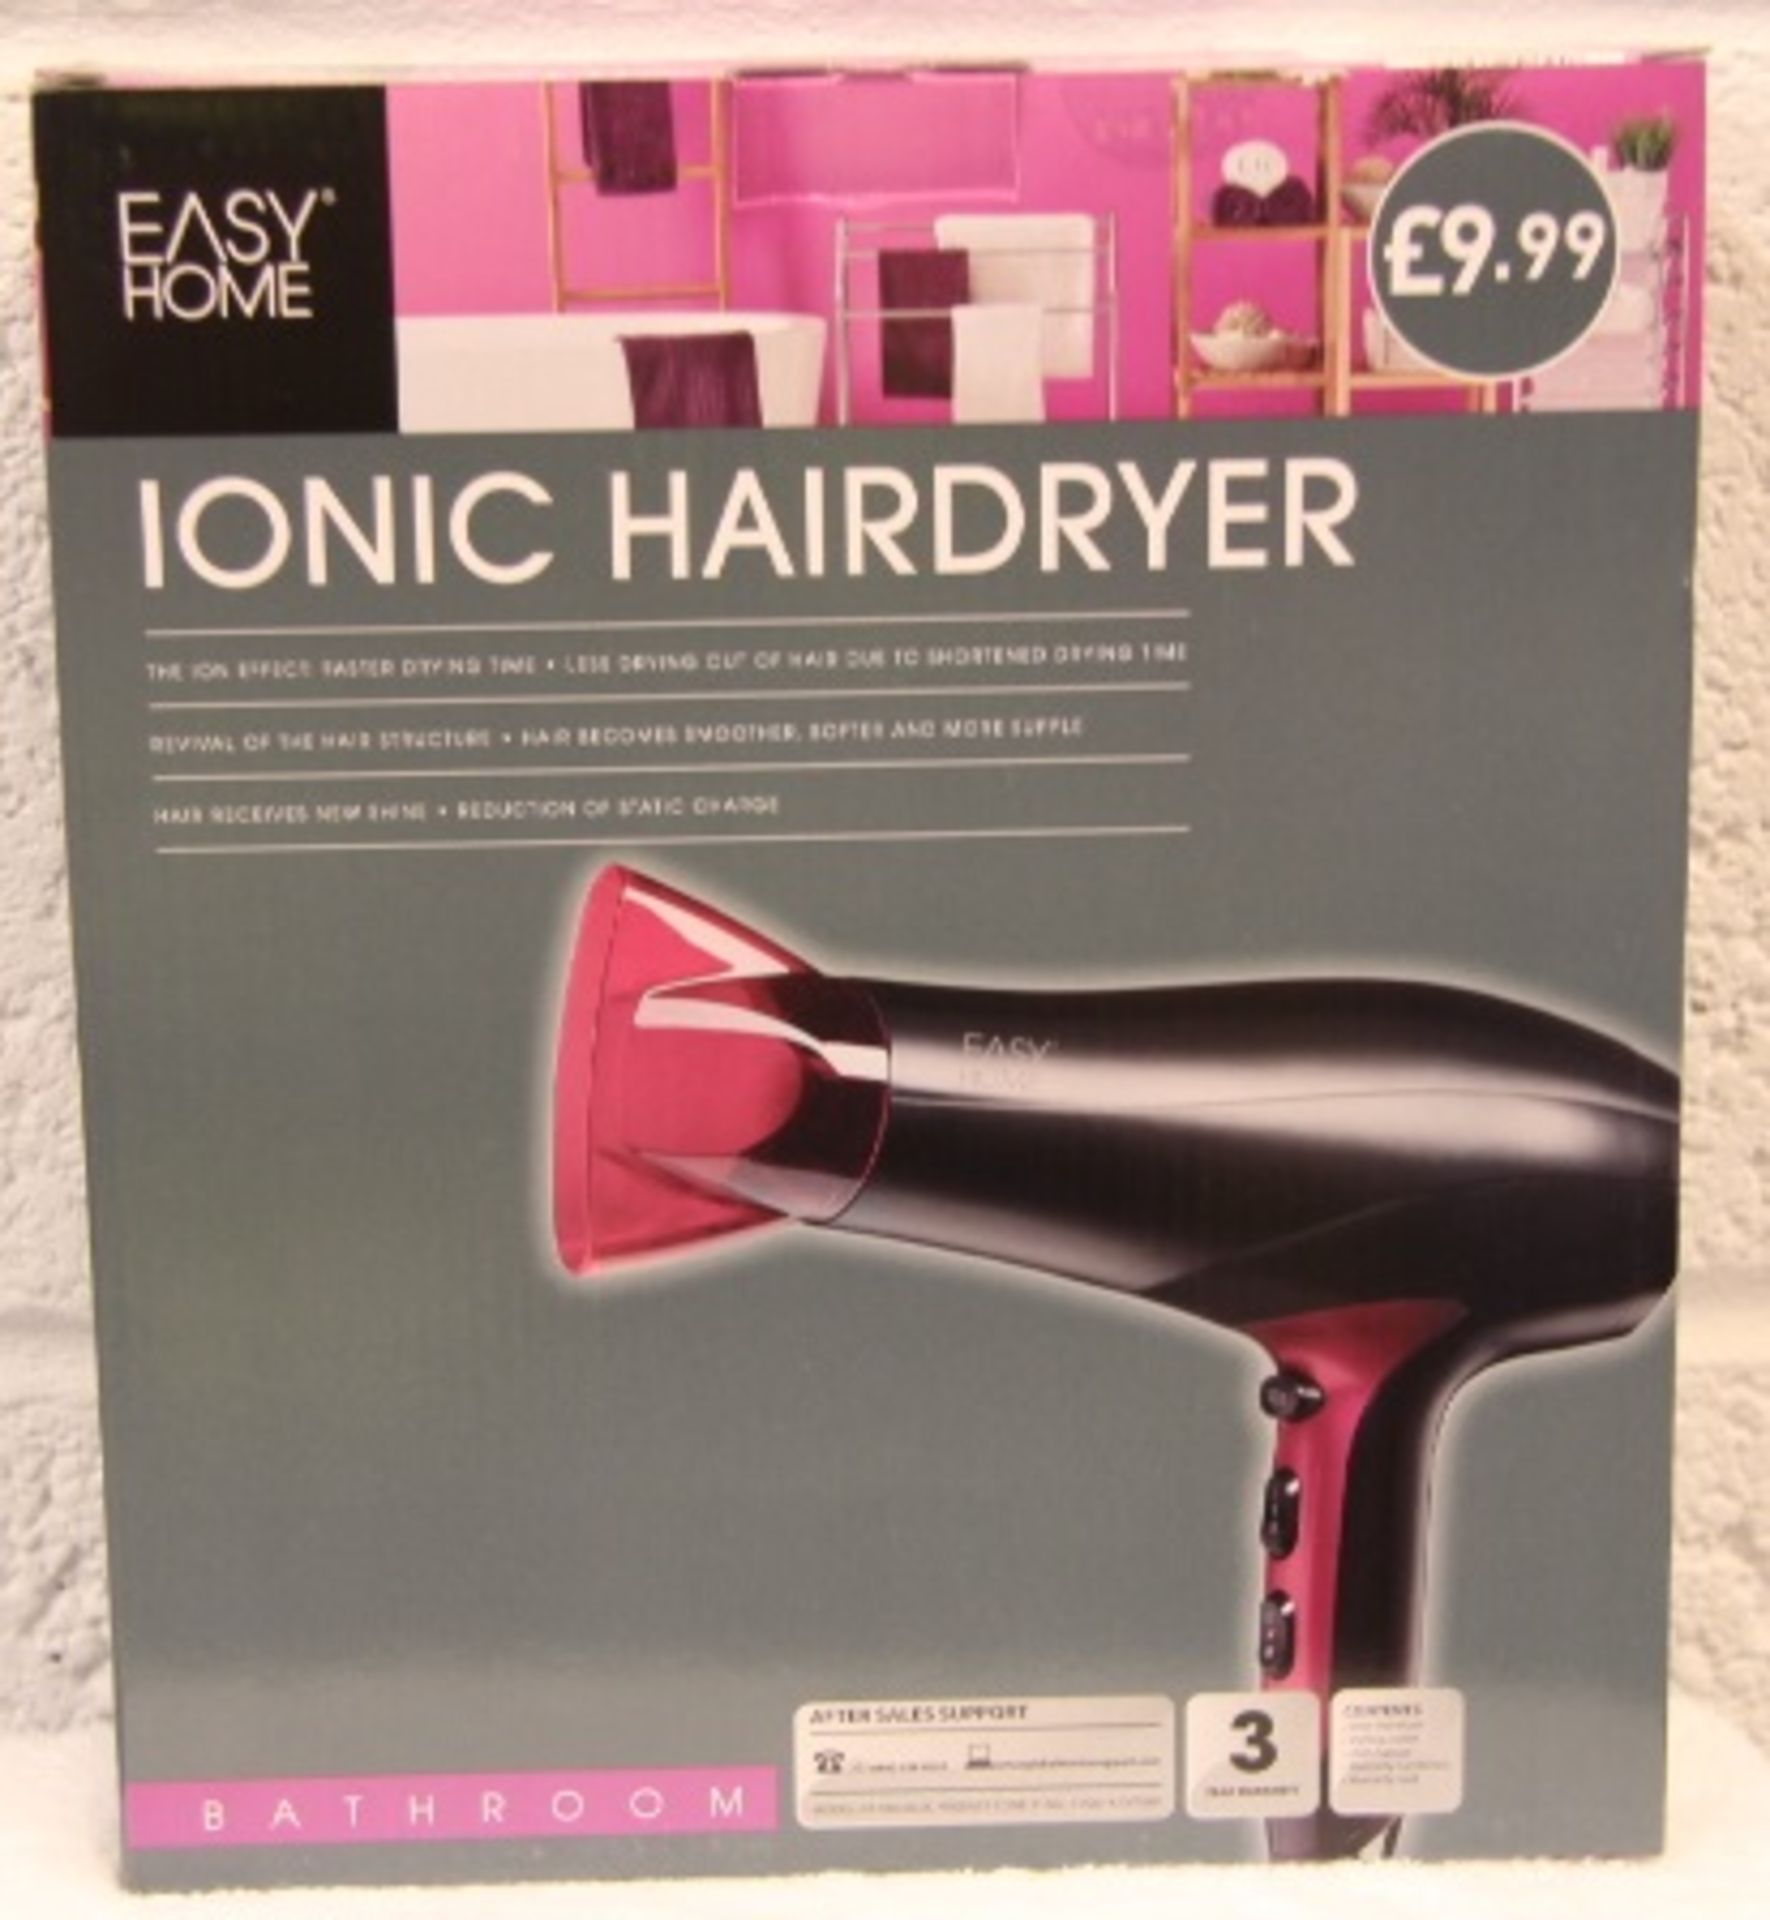 V Brand New Easy Home Ionic Hairdryer-Faster Drying-Revival Of The Hair Structure